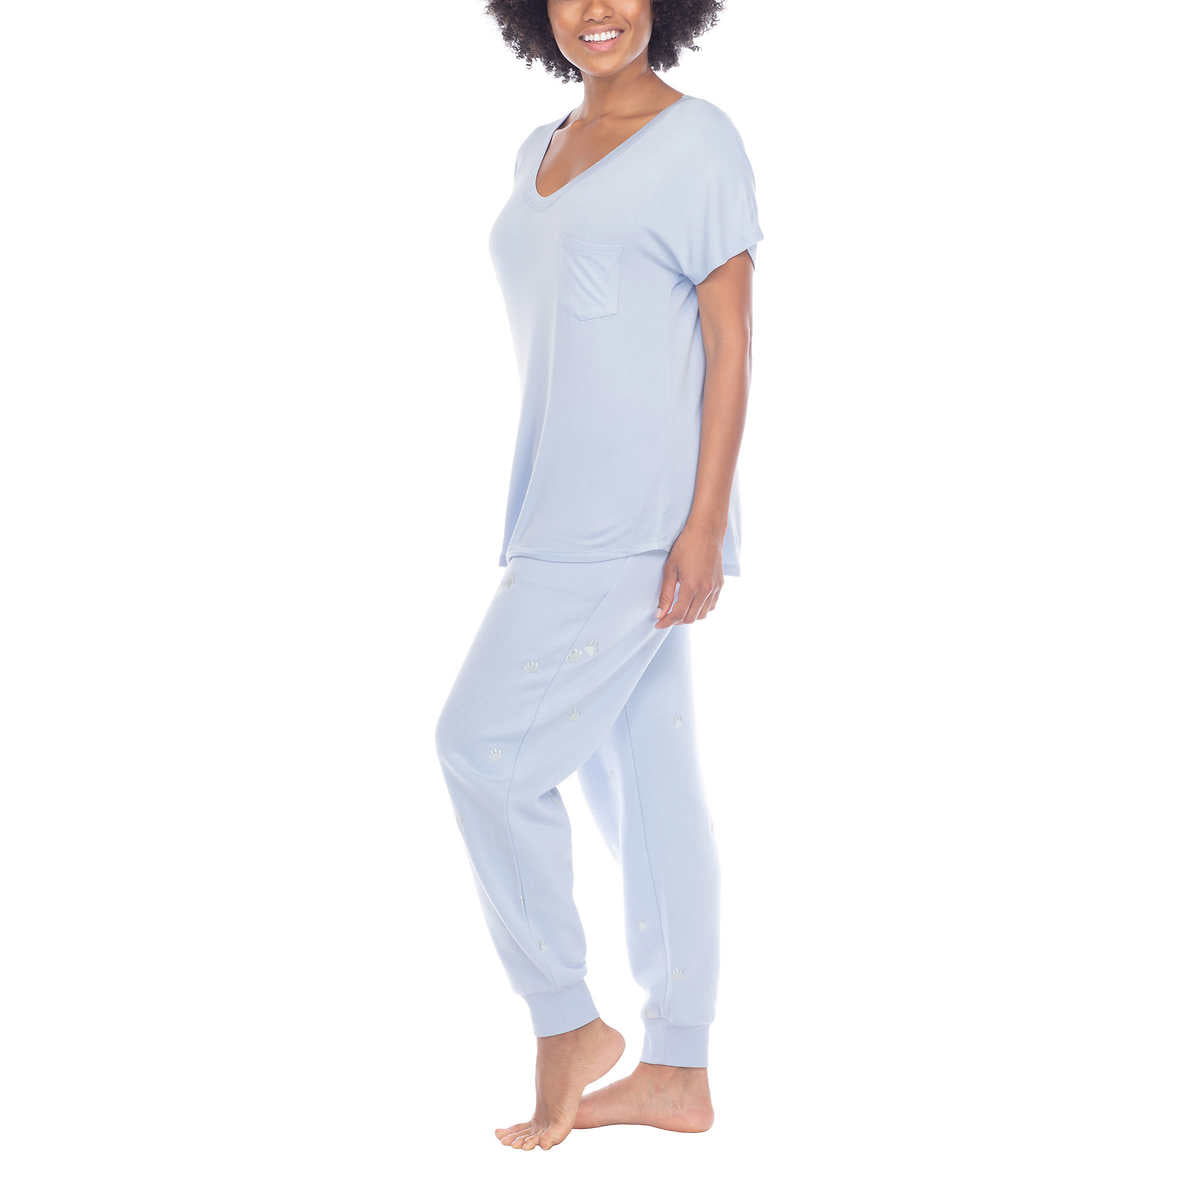 Honeydew Women's 2-piece Pajama Cotton Blend Embroidered Top and Pants Lounge Set